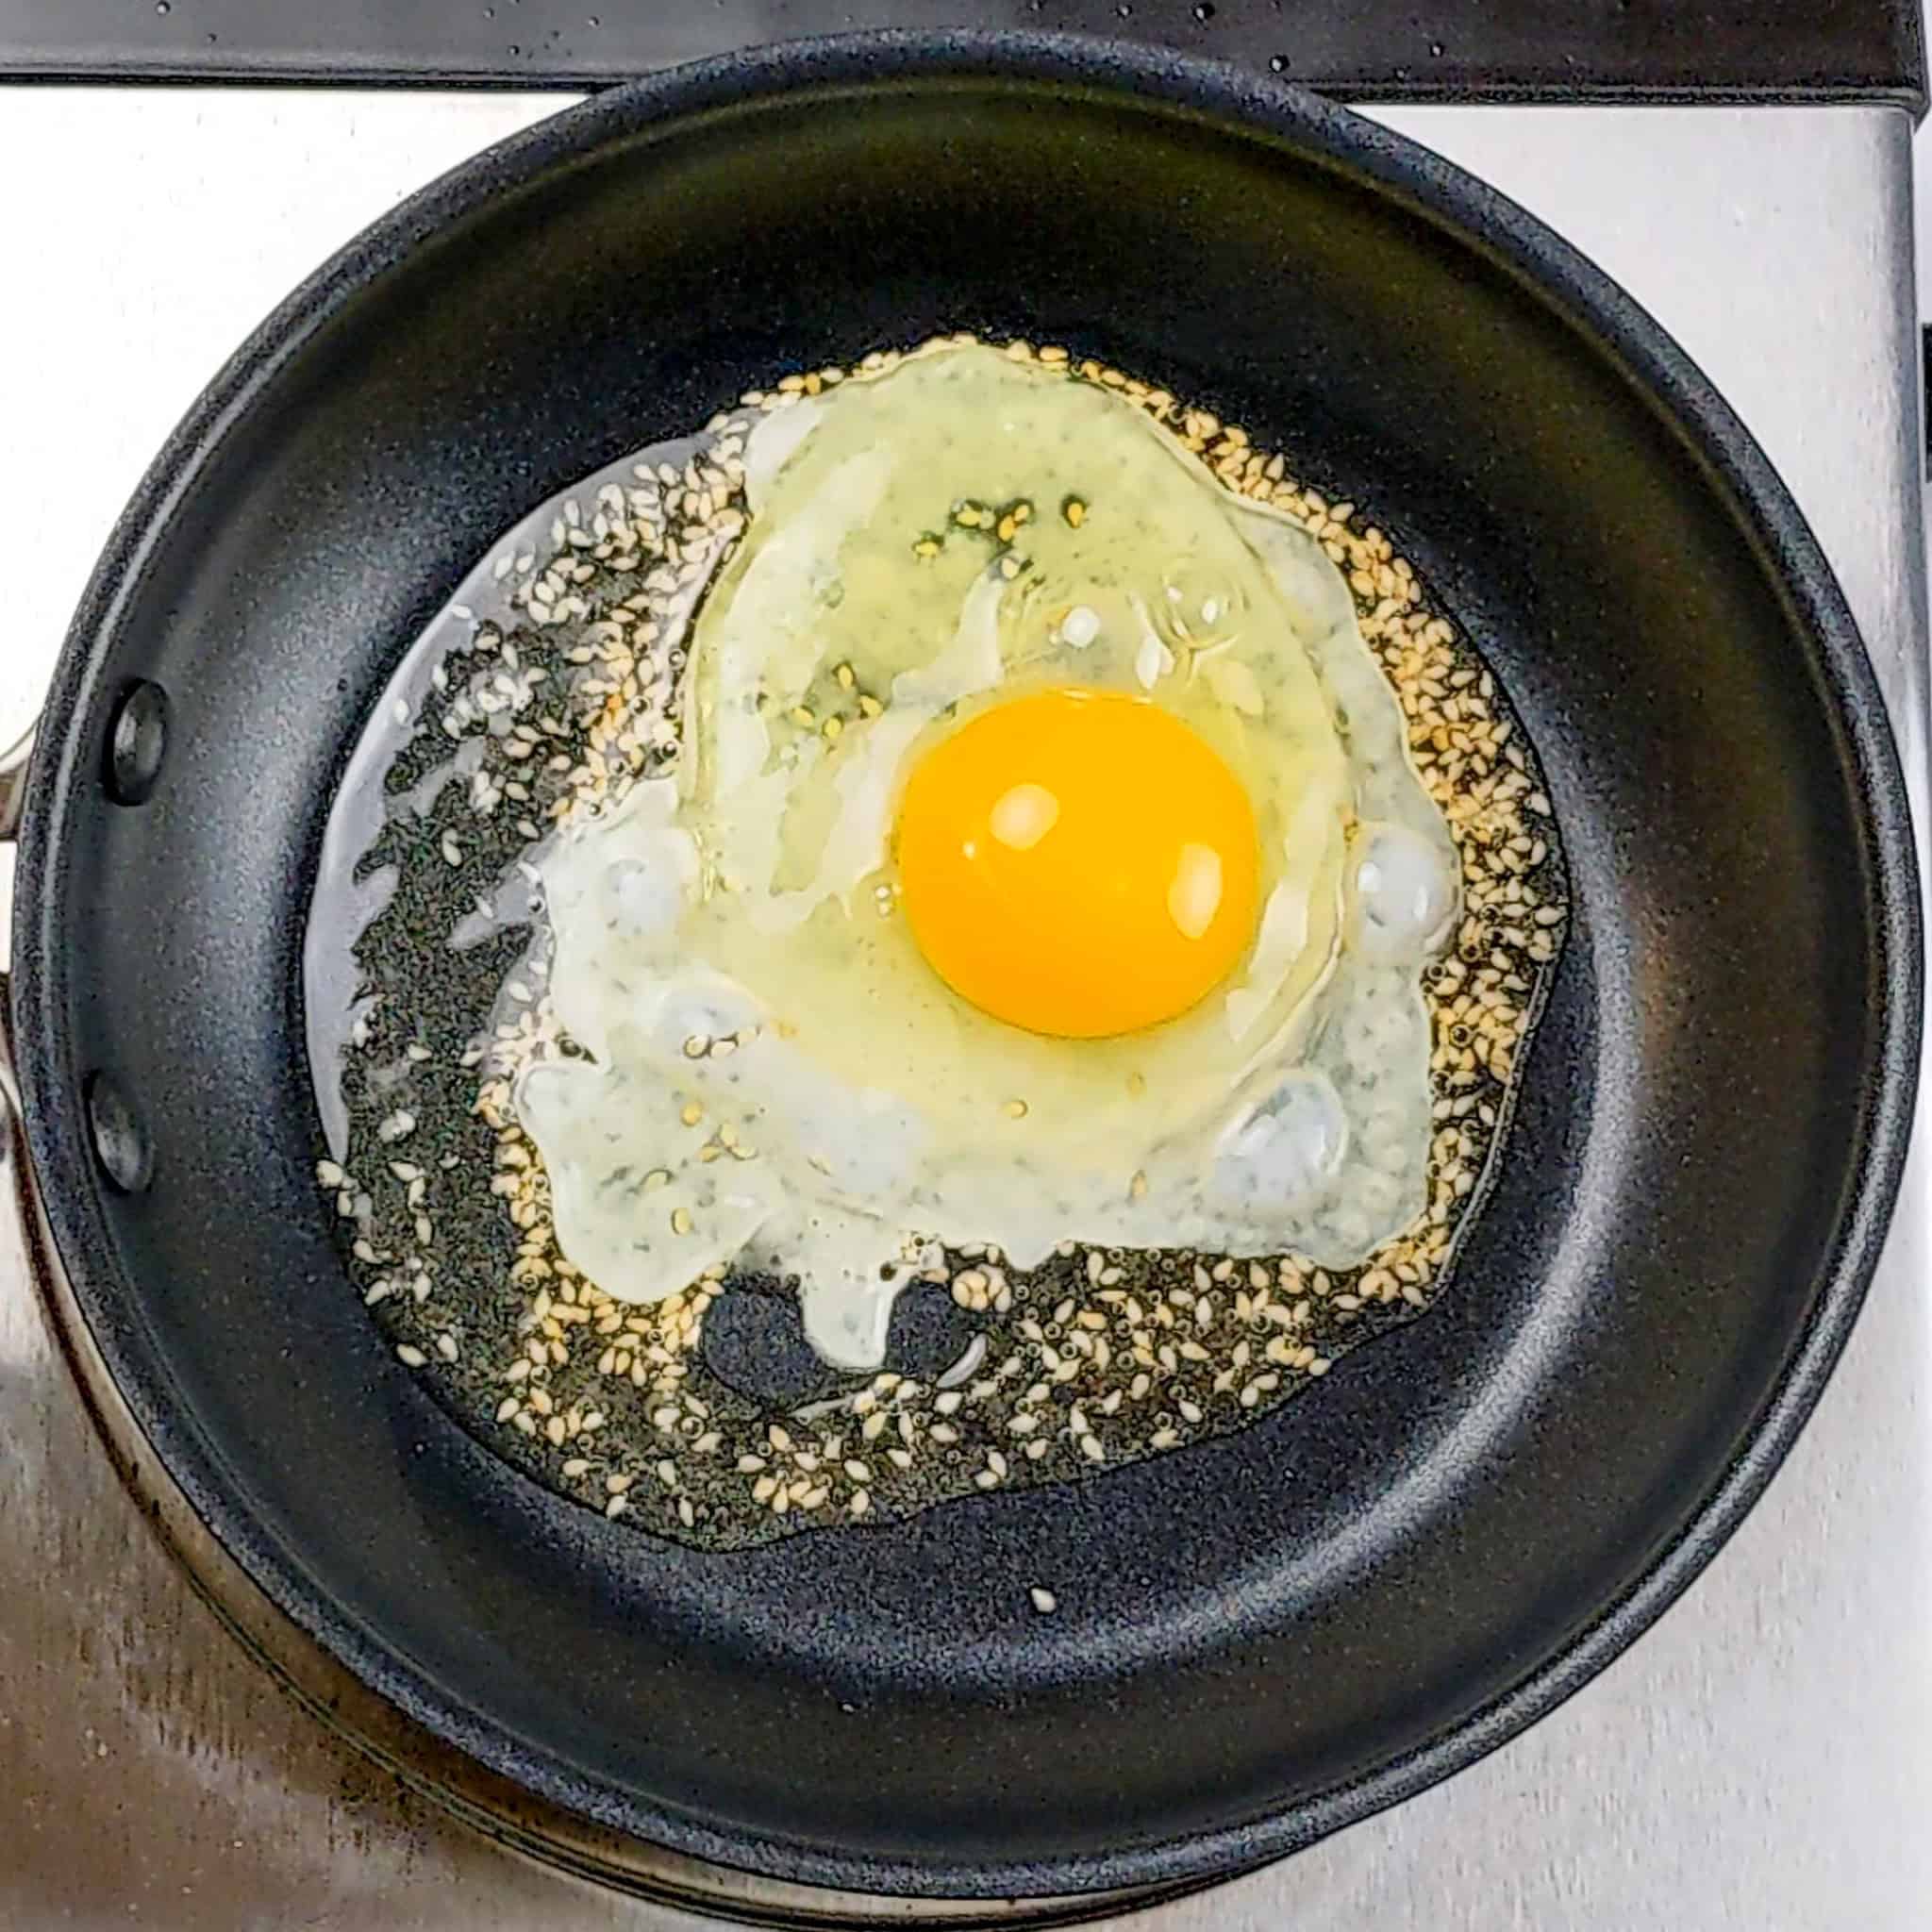 cracked egg with sesame seeds frying in oil in a non stick oxo pan.